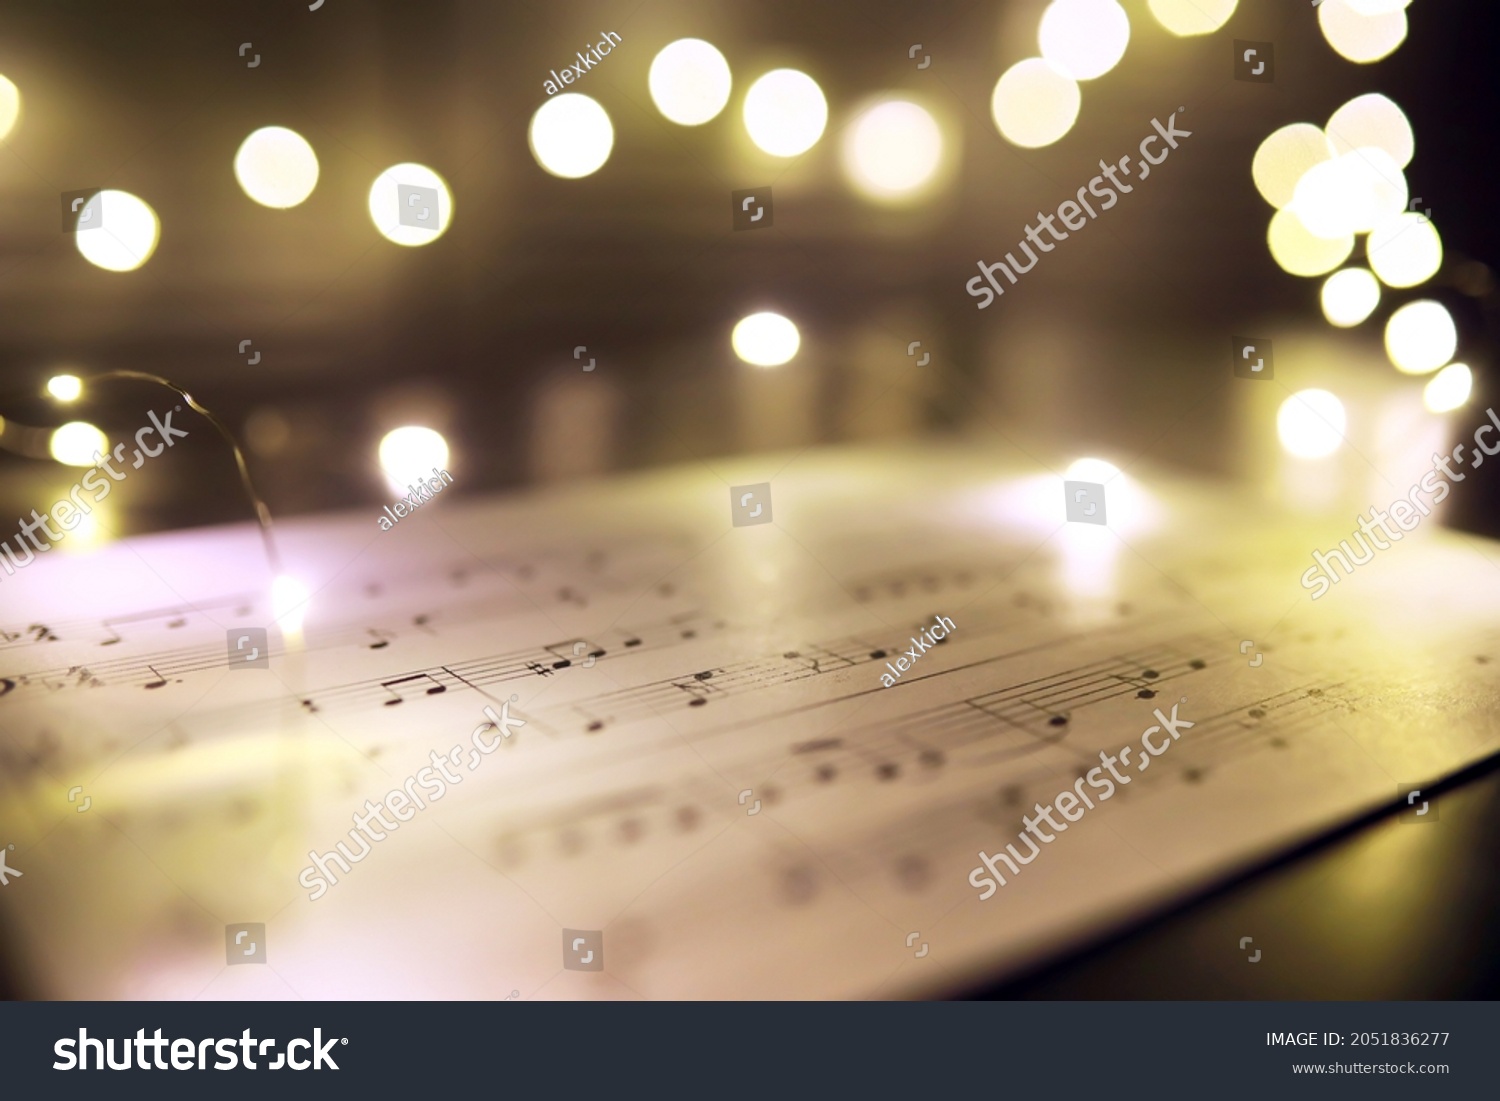 Old sheet with Christmas music notes as background, bokeh effect
 #2051836277